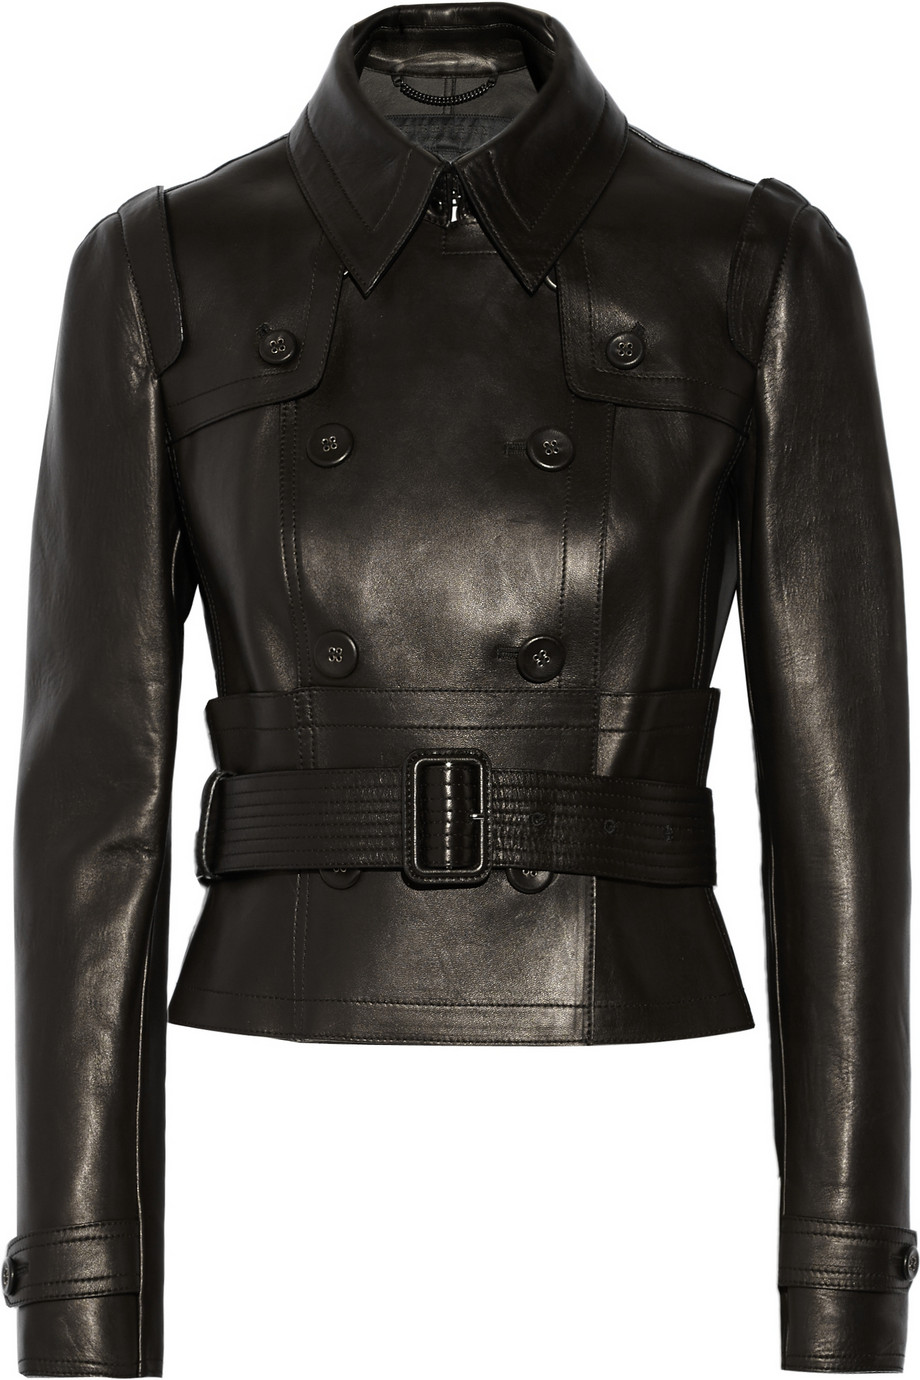 WOMEN’S GENUINE LEATHER DOUBLE-BREASTED JACKET (REJ-632) – RageLeather